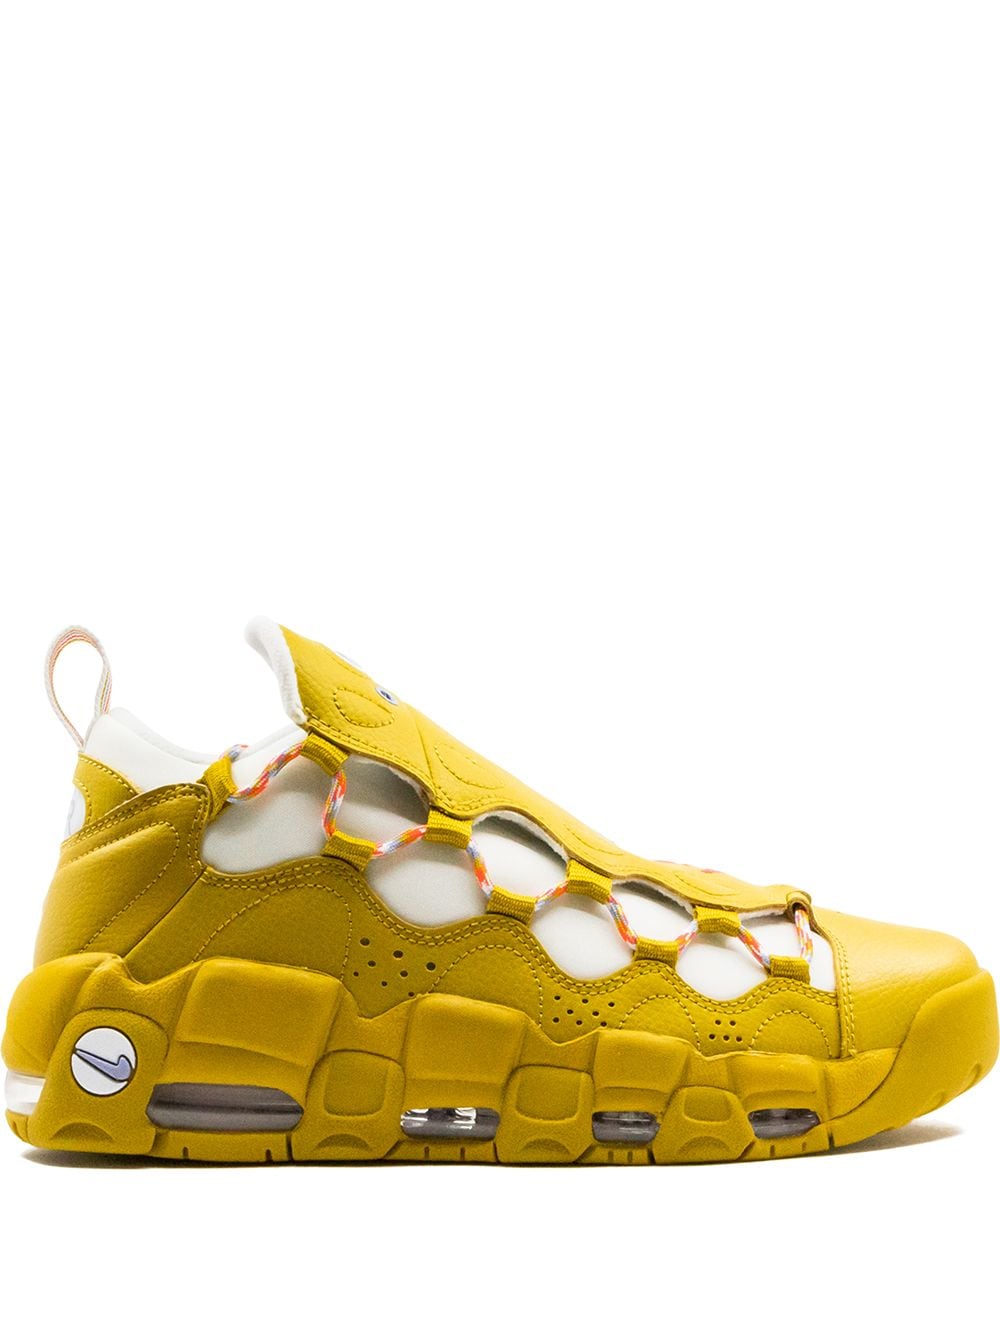 Nike Air More Money "Meant To Fly" sneakers - Yellow von Nike